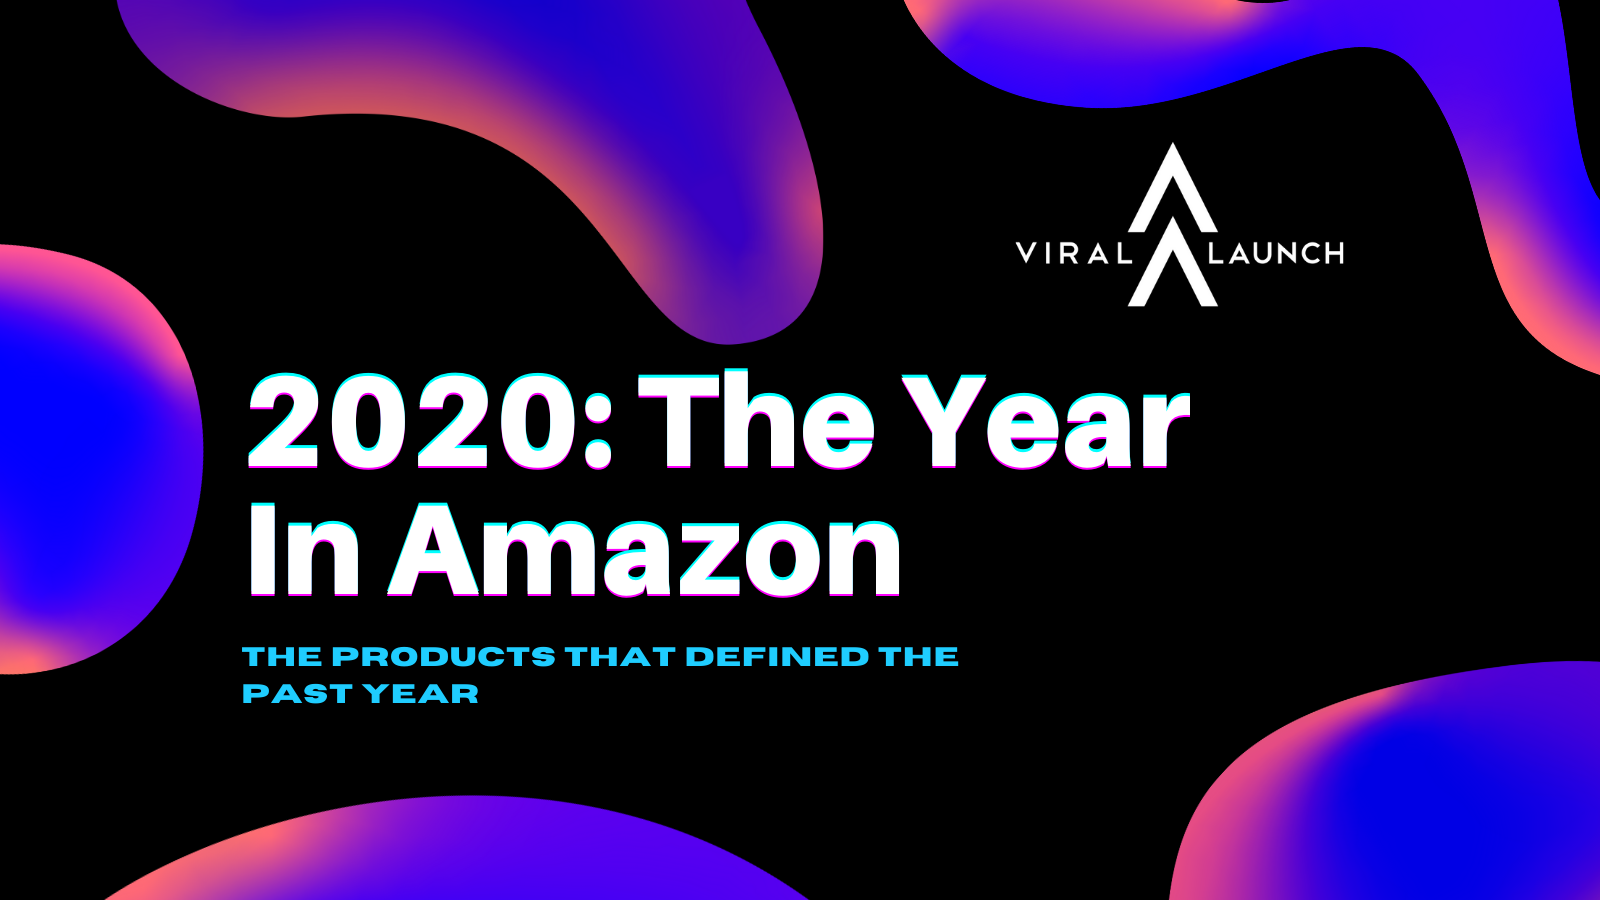 2020: The Year In Amazon